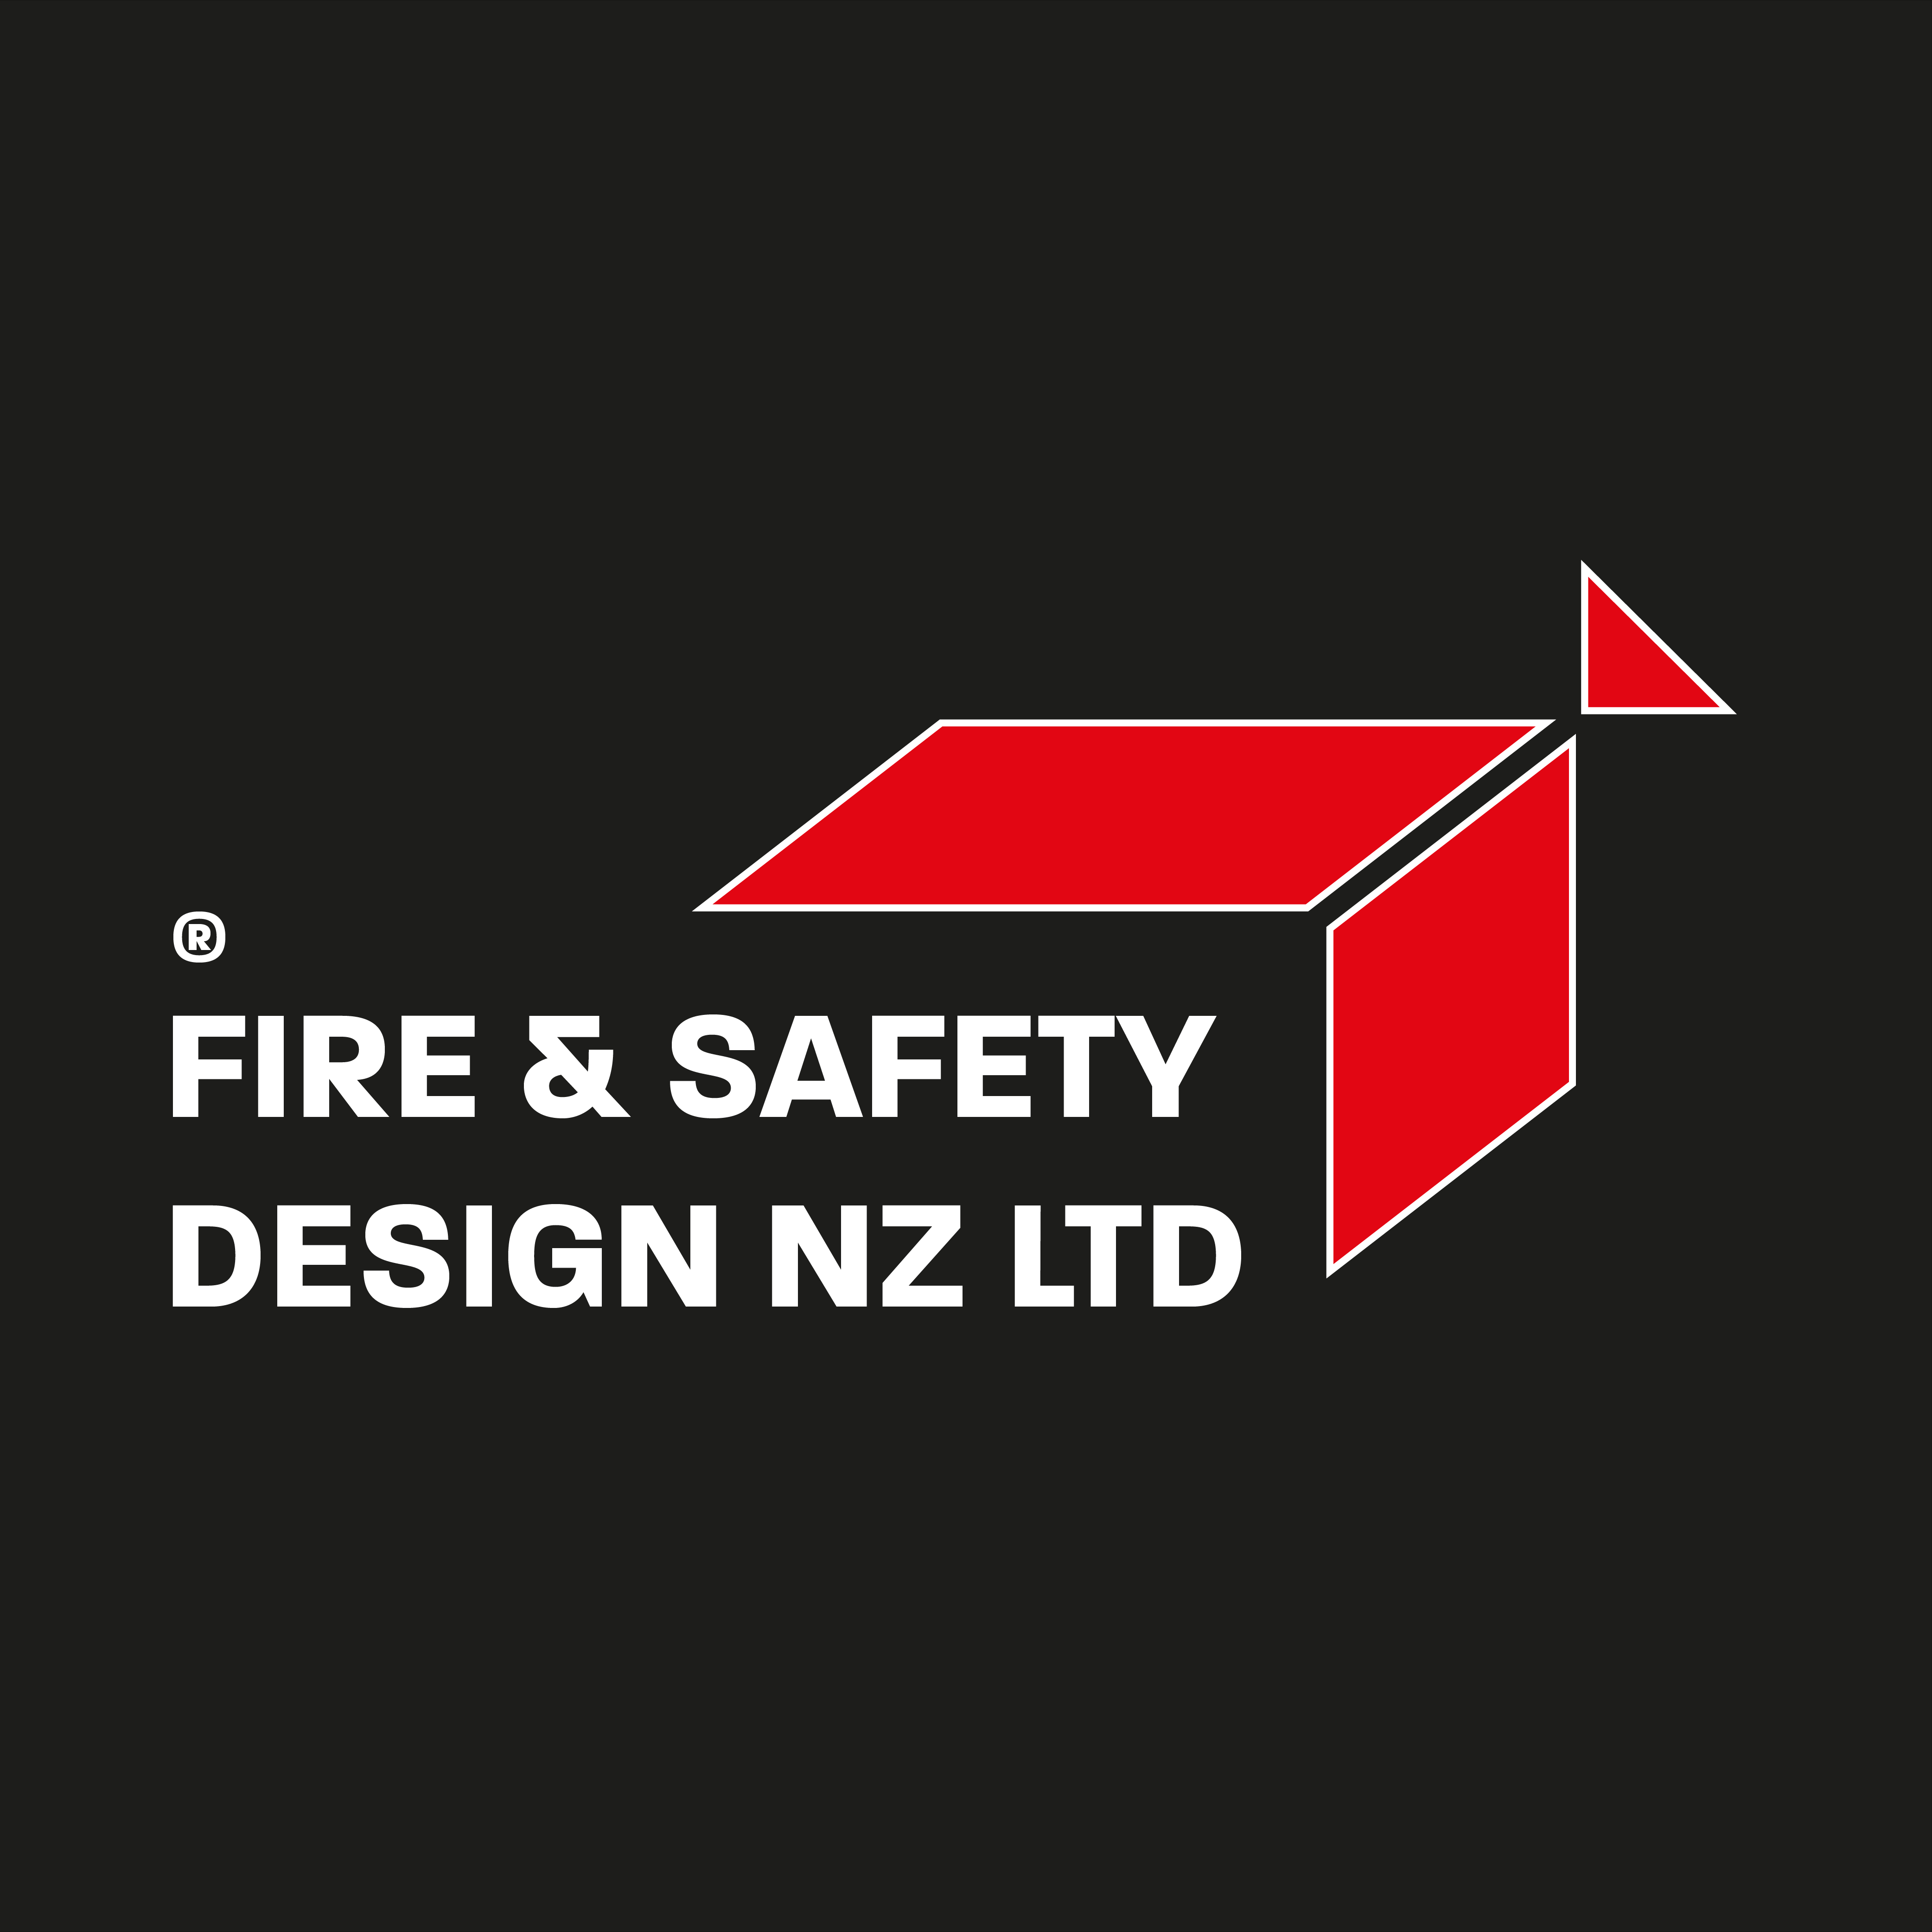 Introducing Fire & Safety Design - A Division of Building & Fire Services